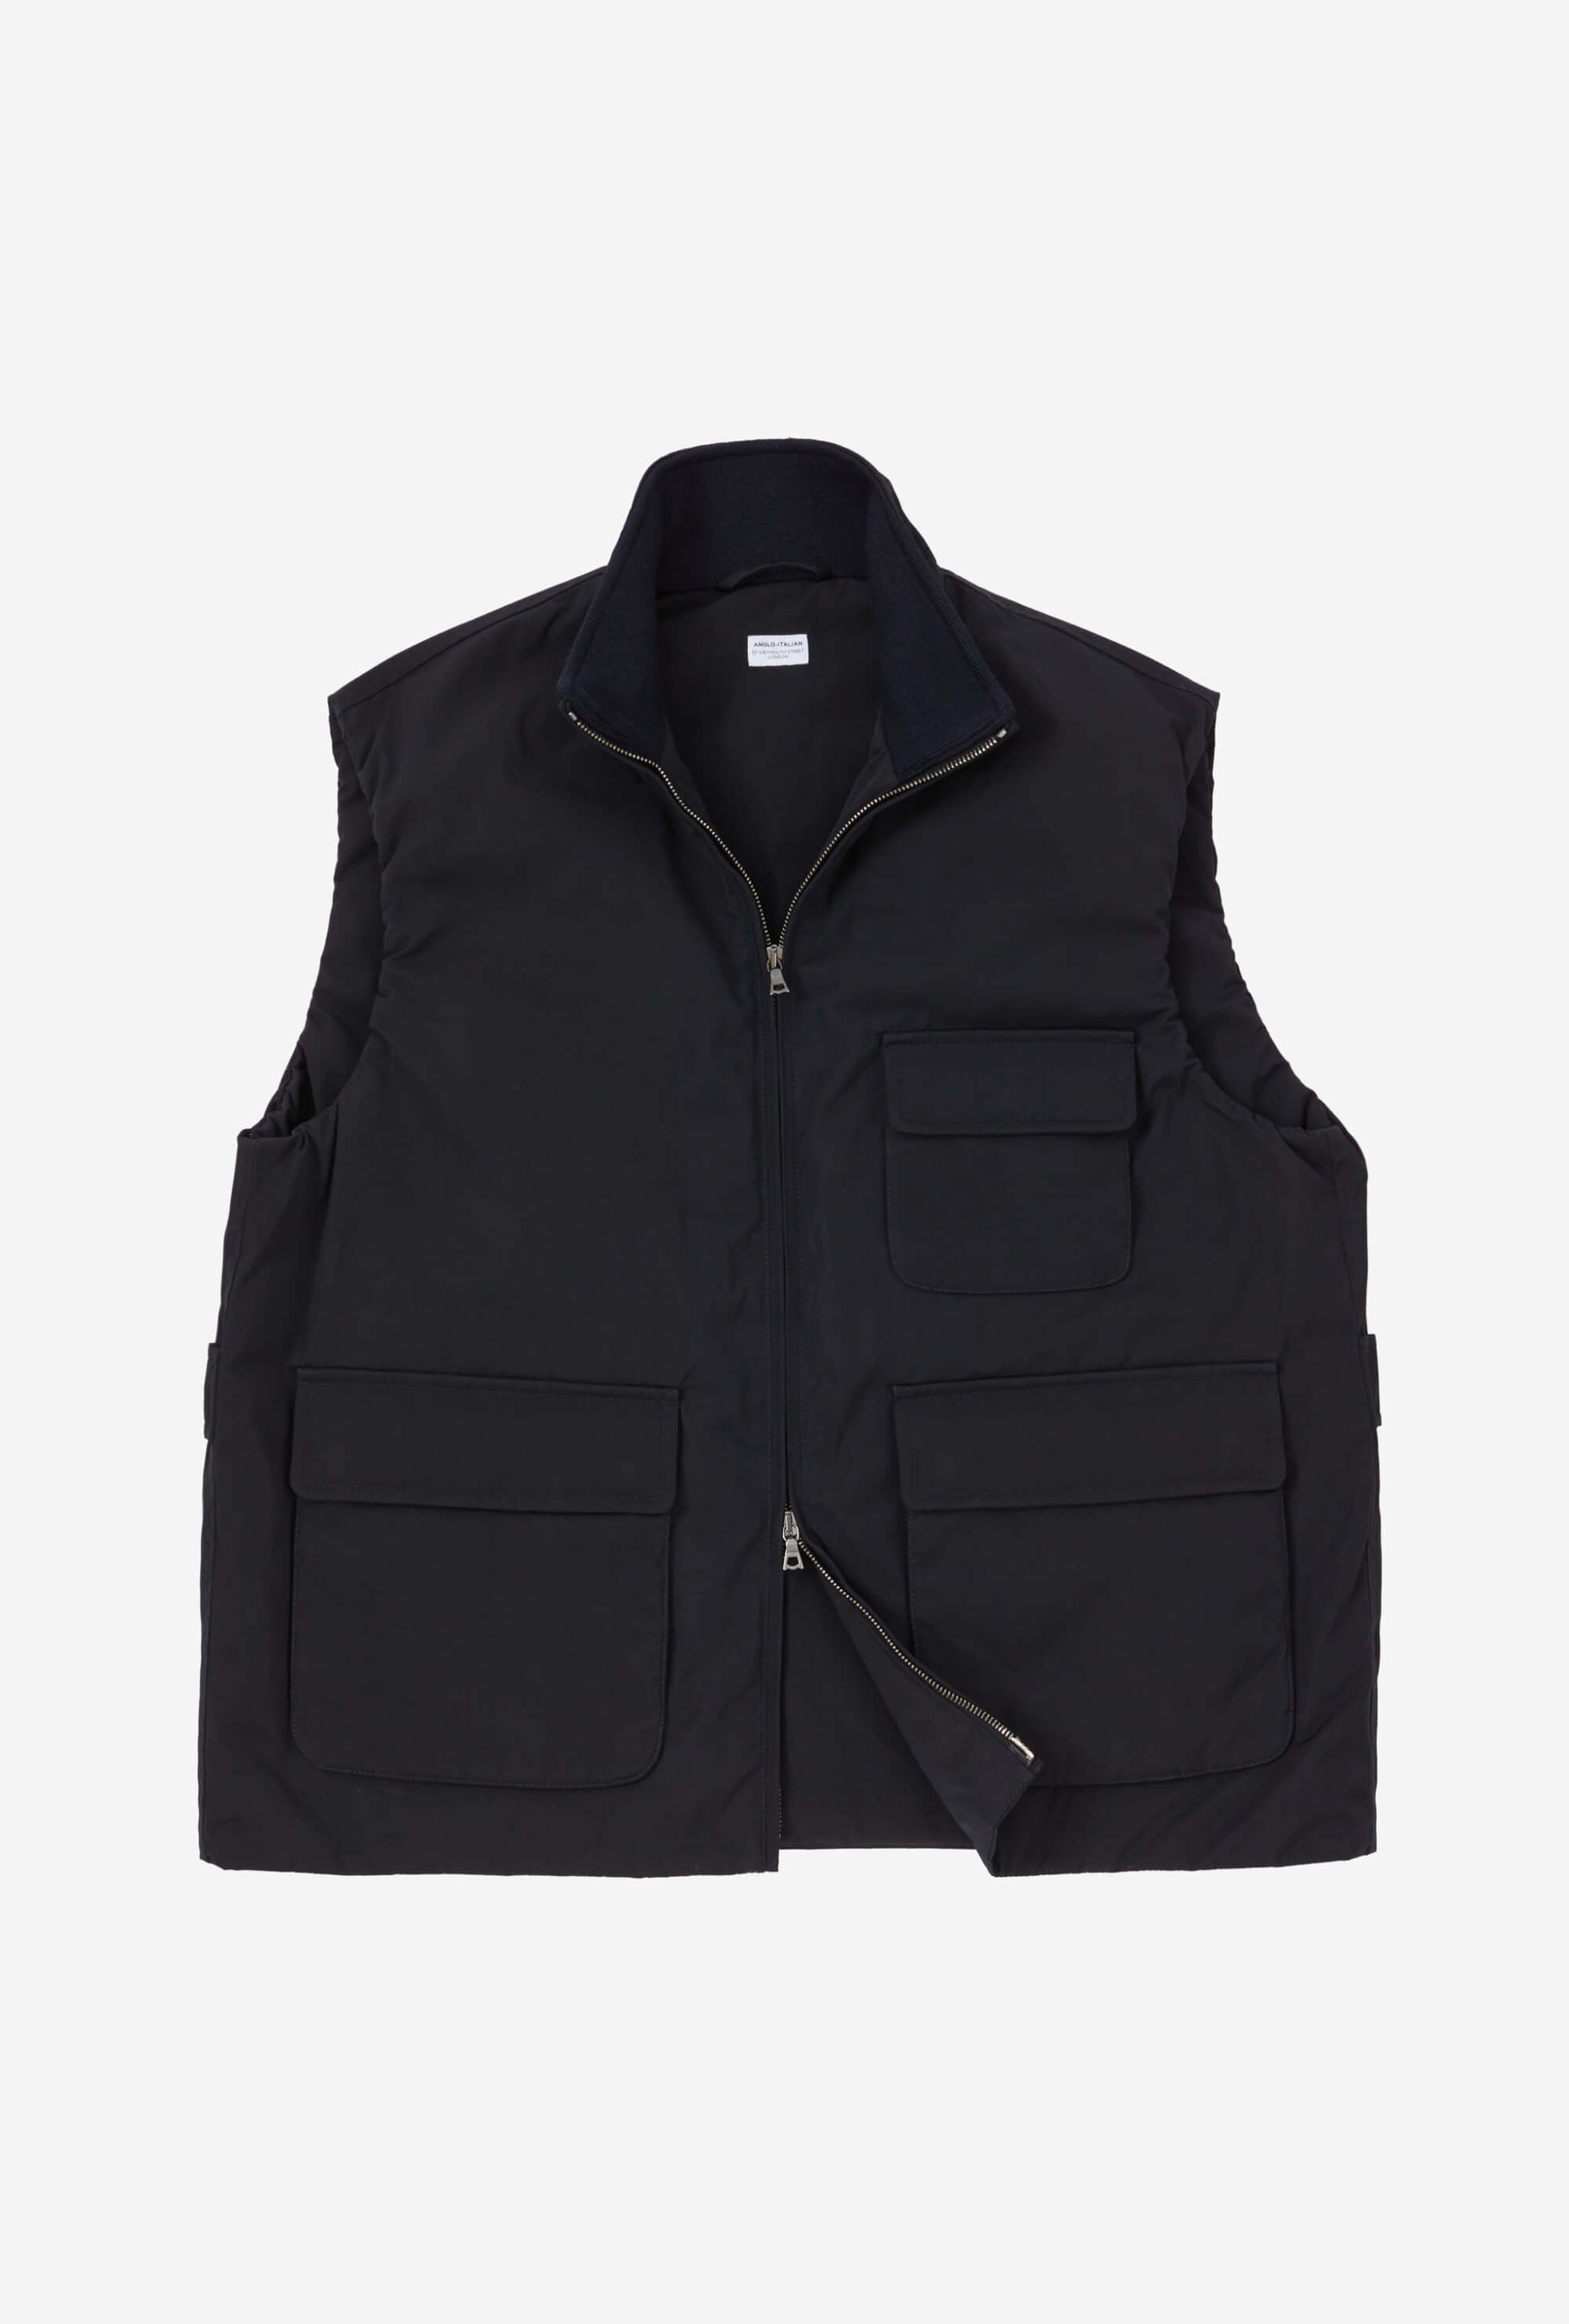 Intrend - Italian Fashion Outlet - Ribbed wool gilet